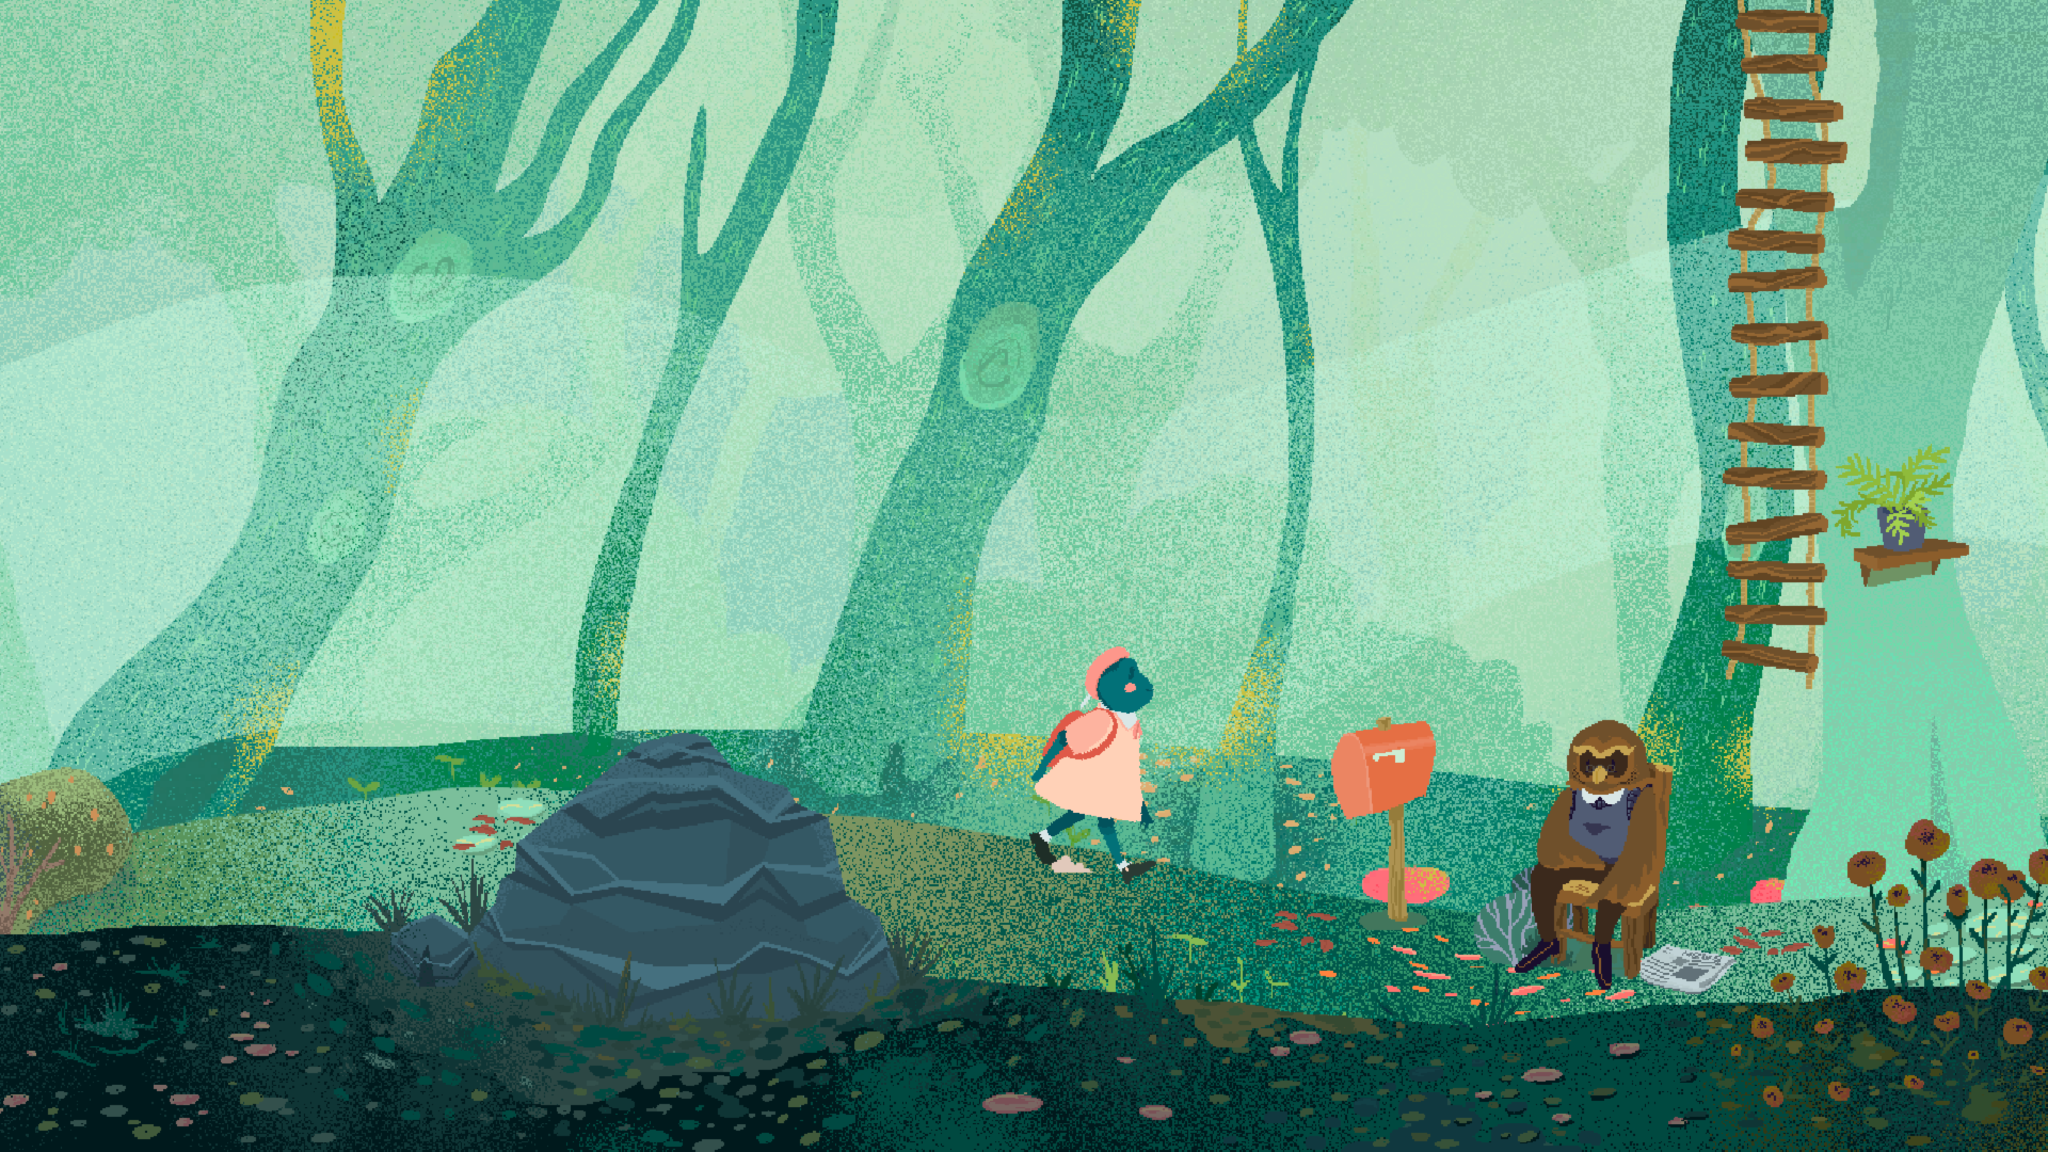 Screenshot of Teacup the frog walking through a green forest. She's wearing a pink beret and dress